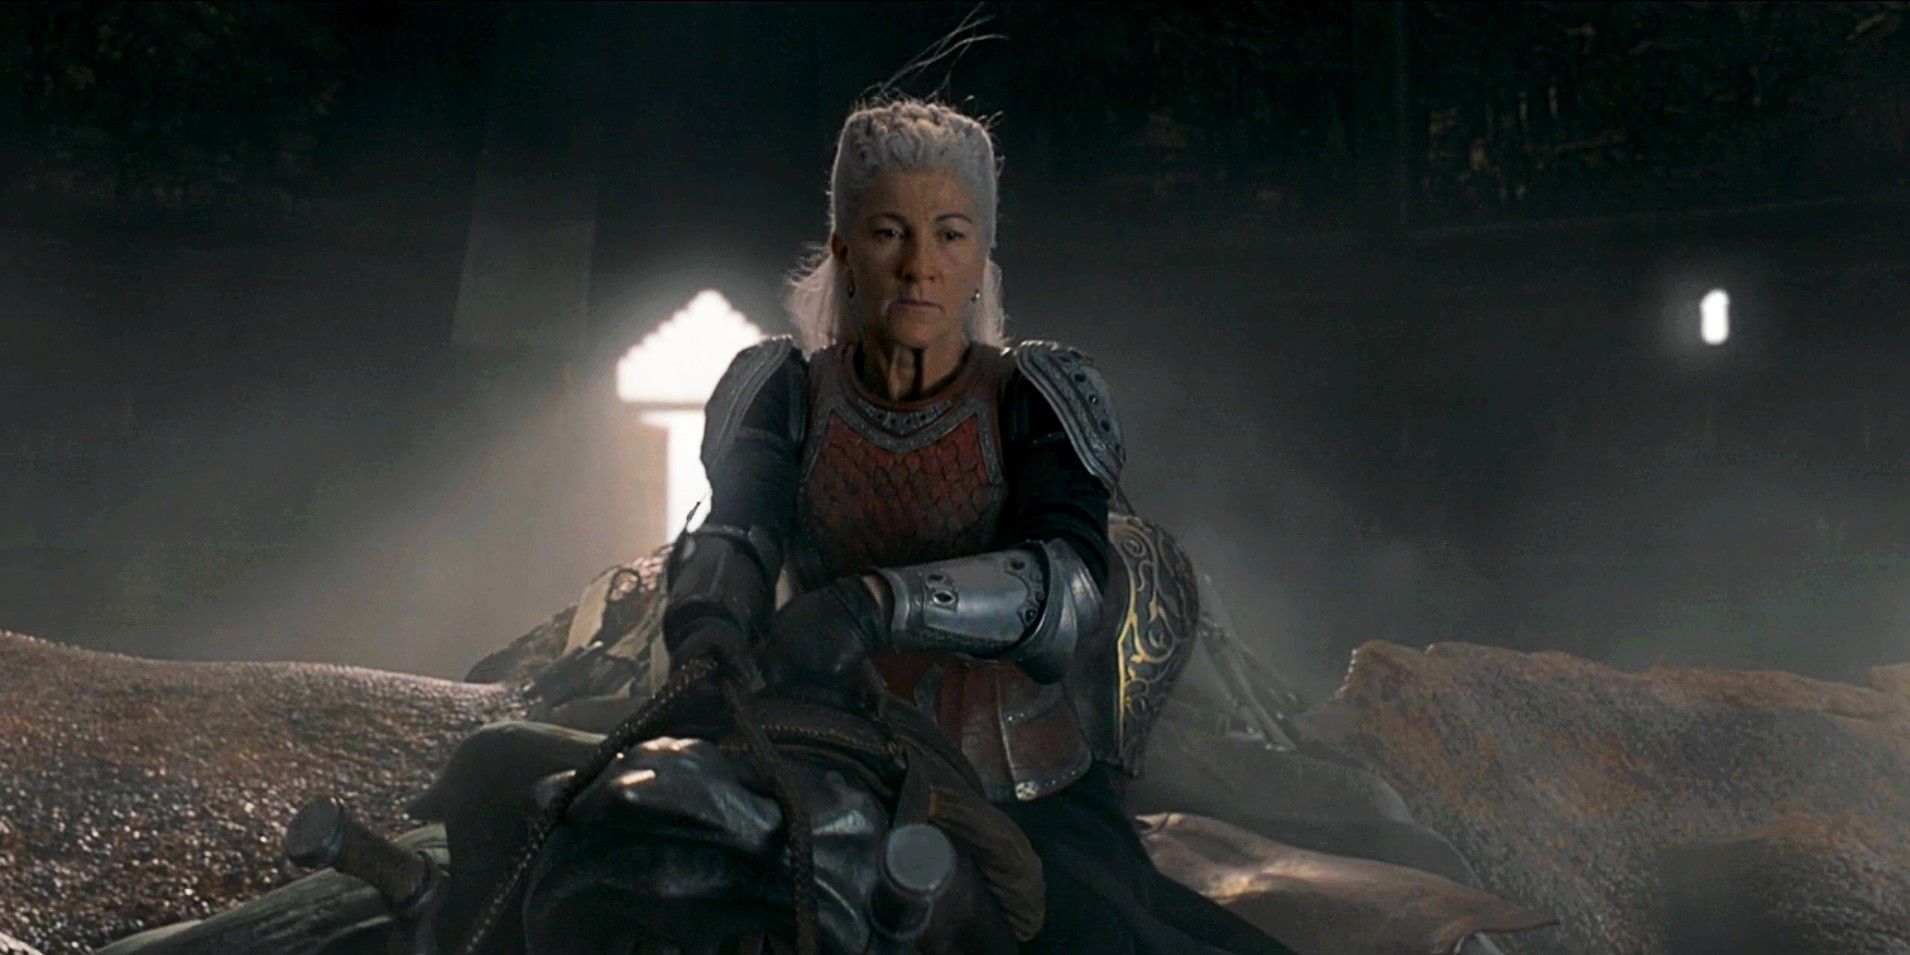 Eve Best as Rhaenys Targaryen riding a dragon in House of the Dragon episode 9